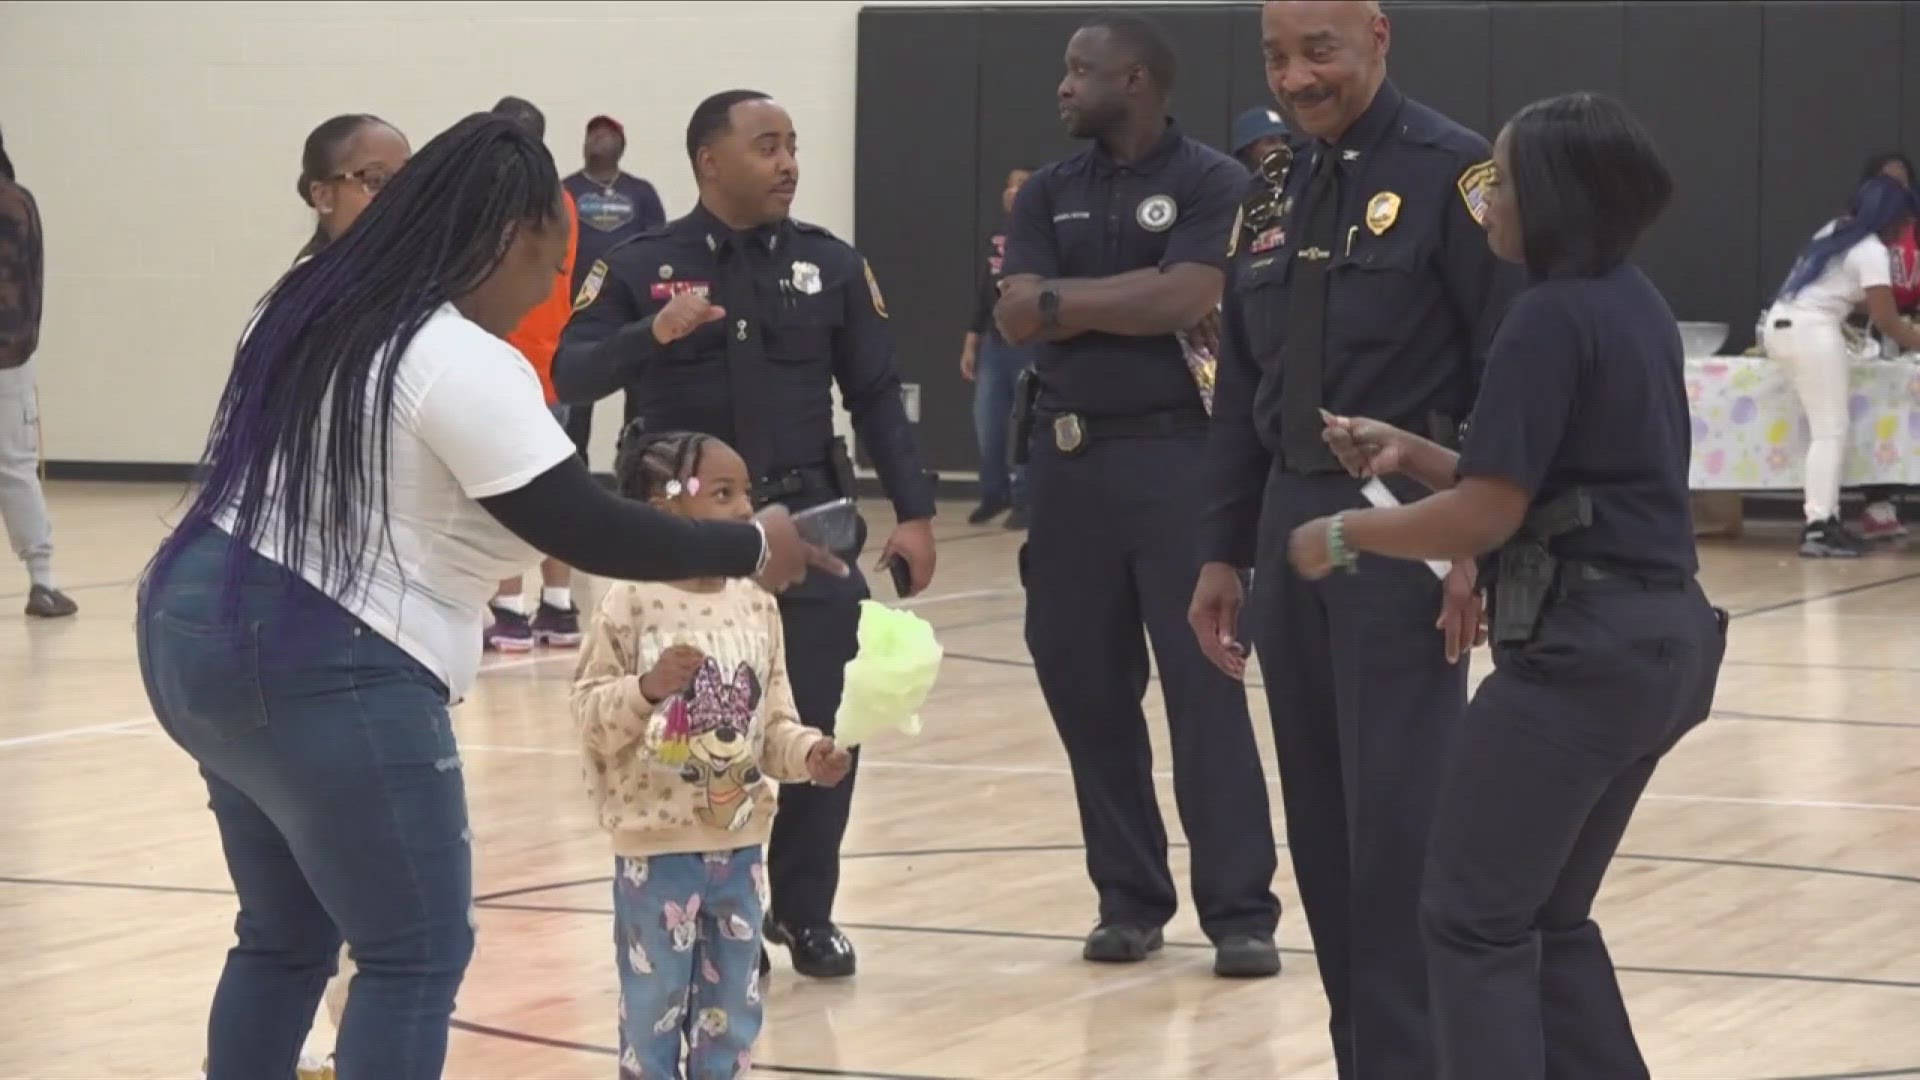 More than 1,000 students, in 18 Memphis-Shelby County Schools, graduated from MPD's D.A.R.E. program this year.